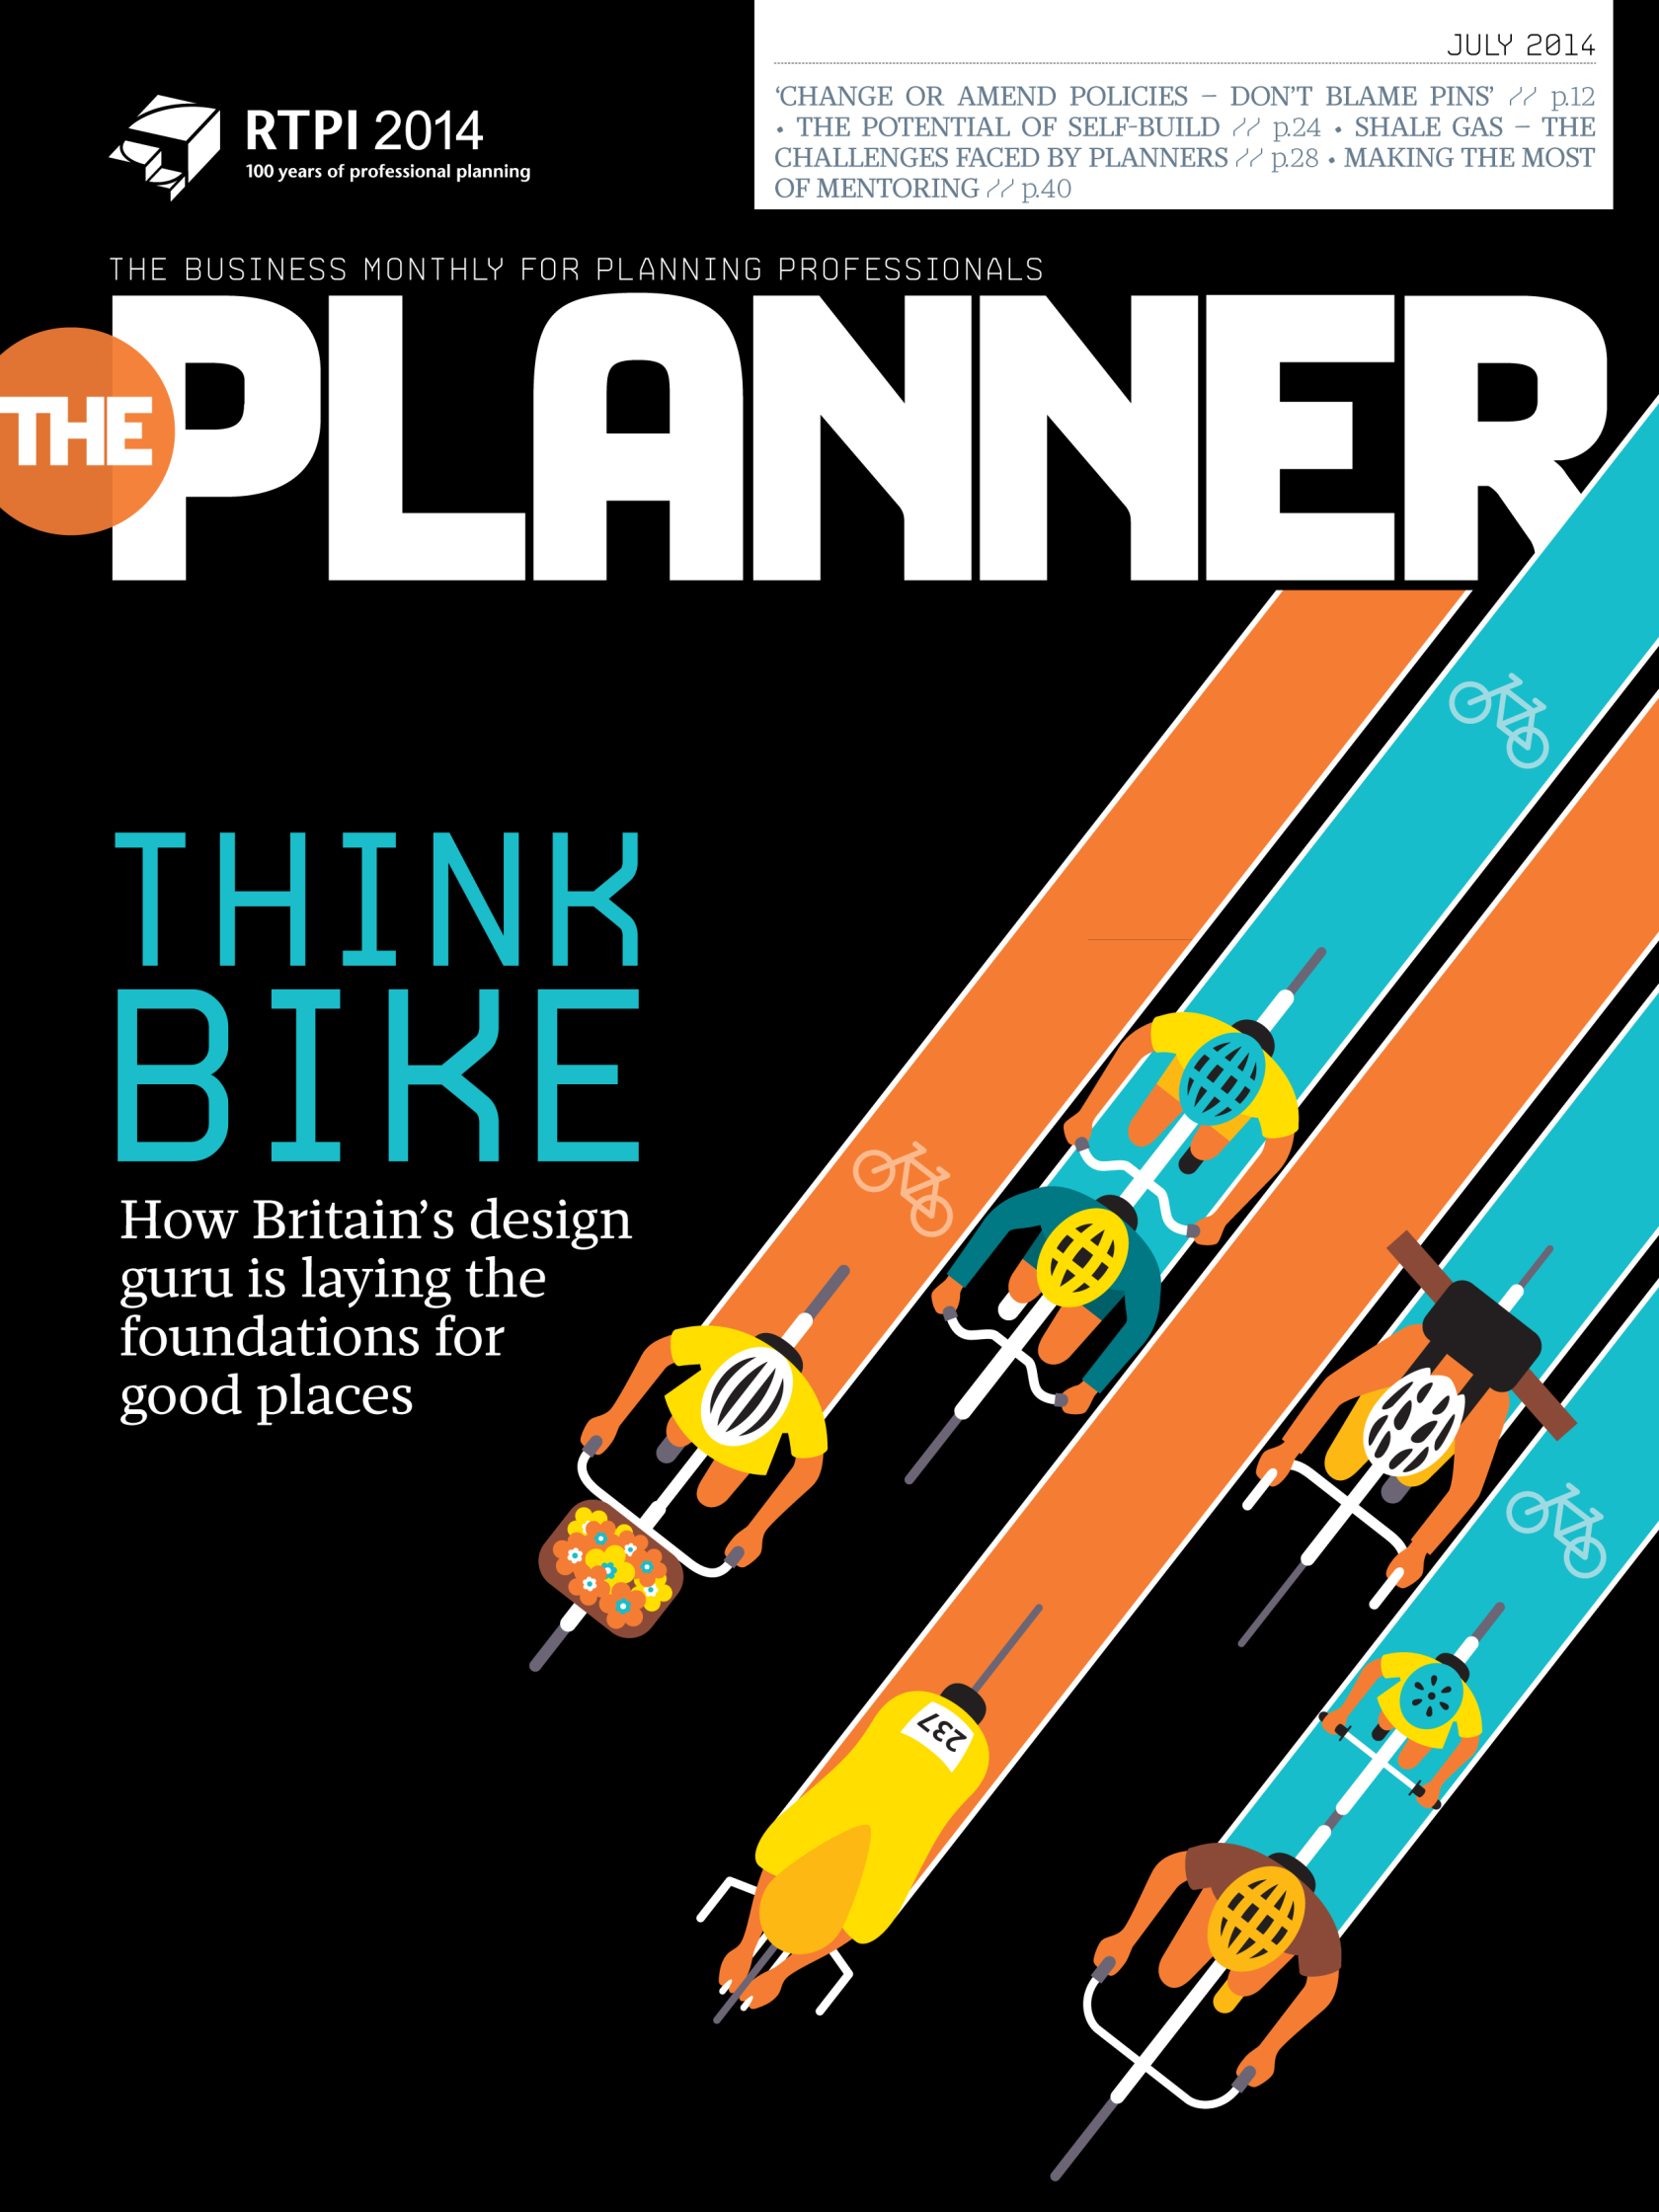 Think Bike Cover / The Planner